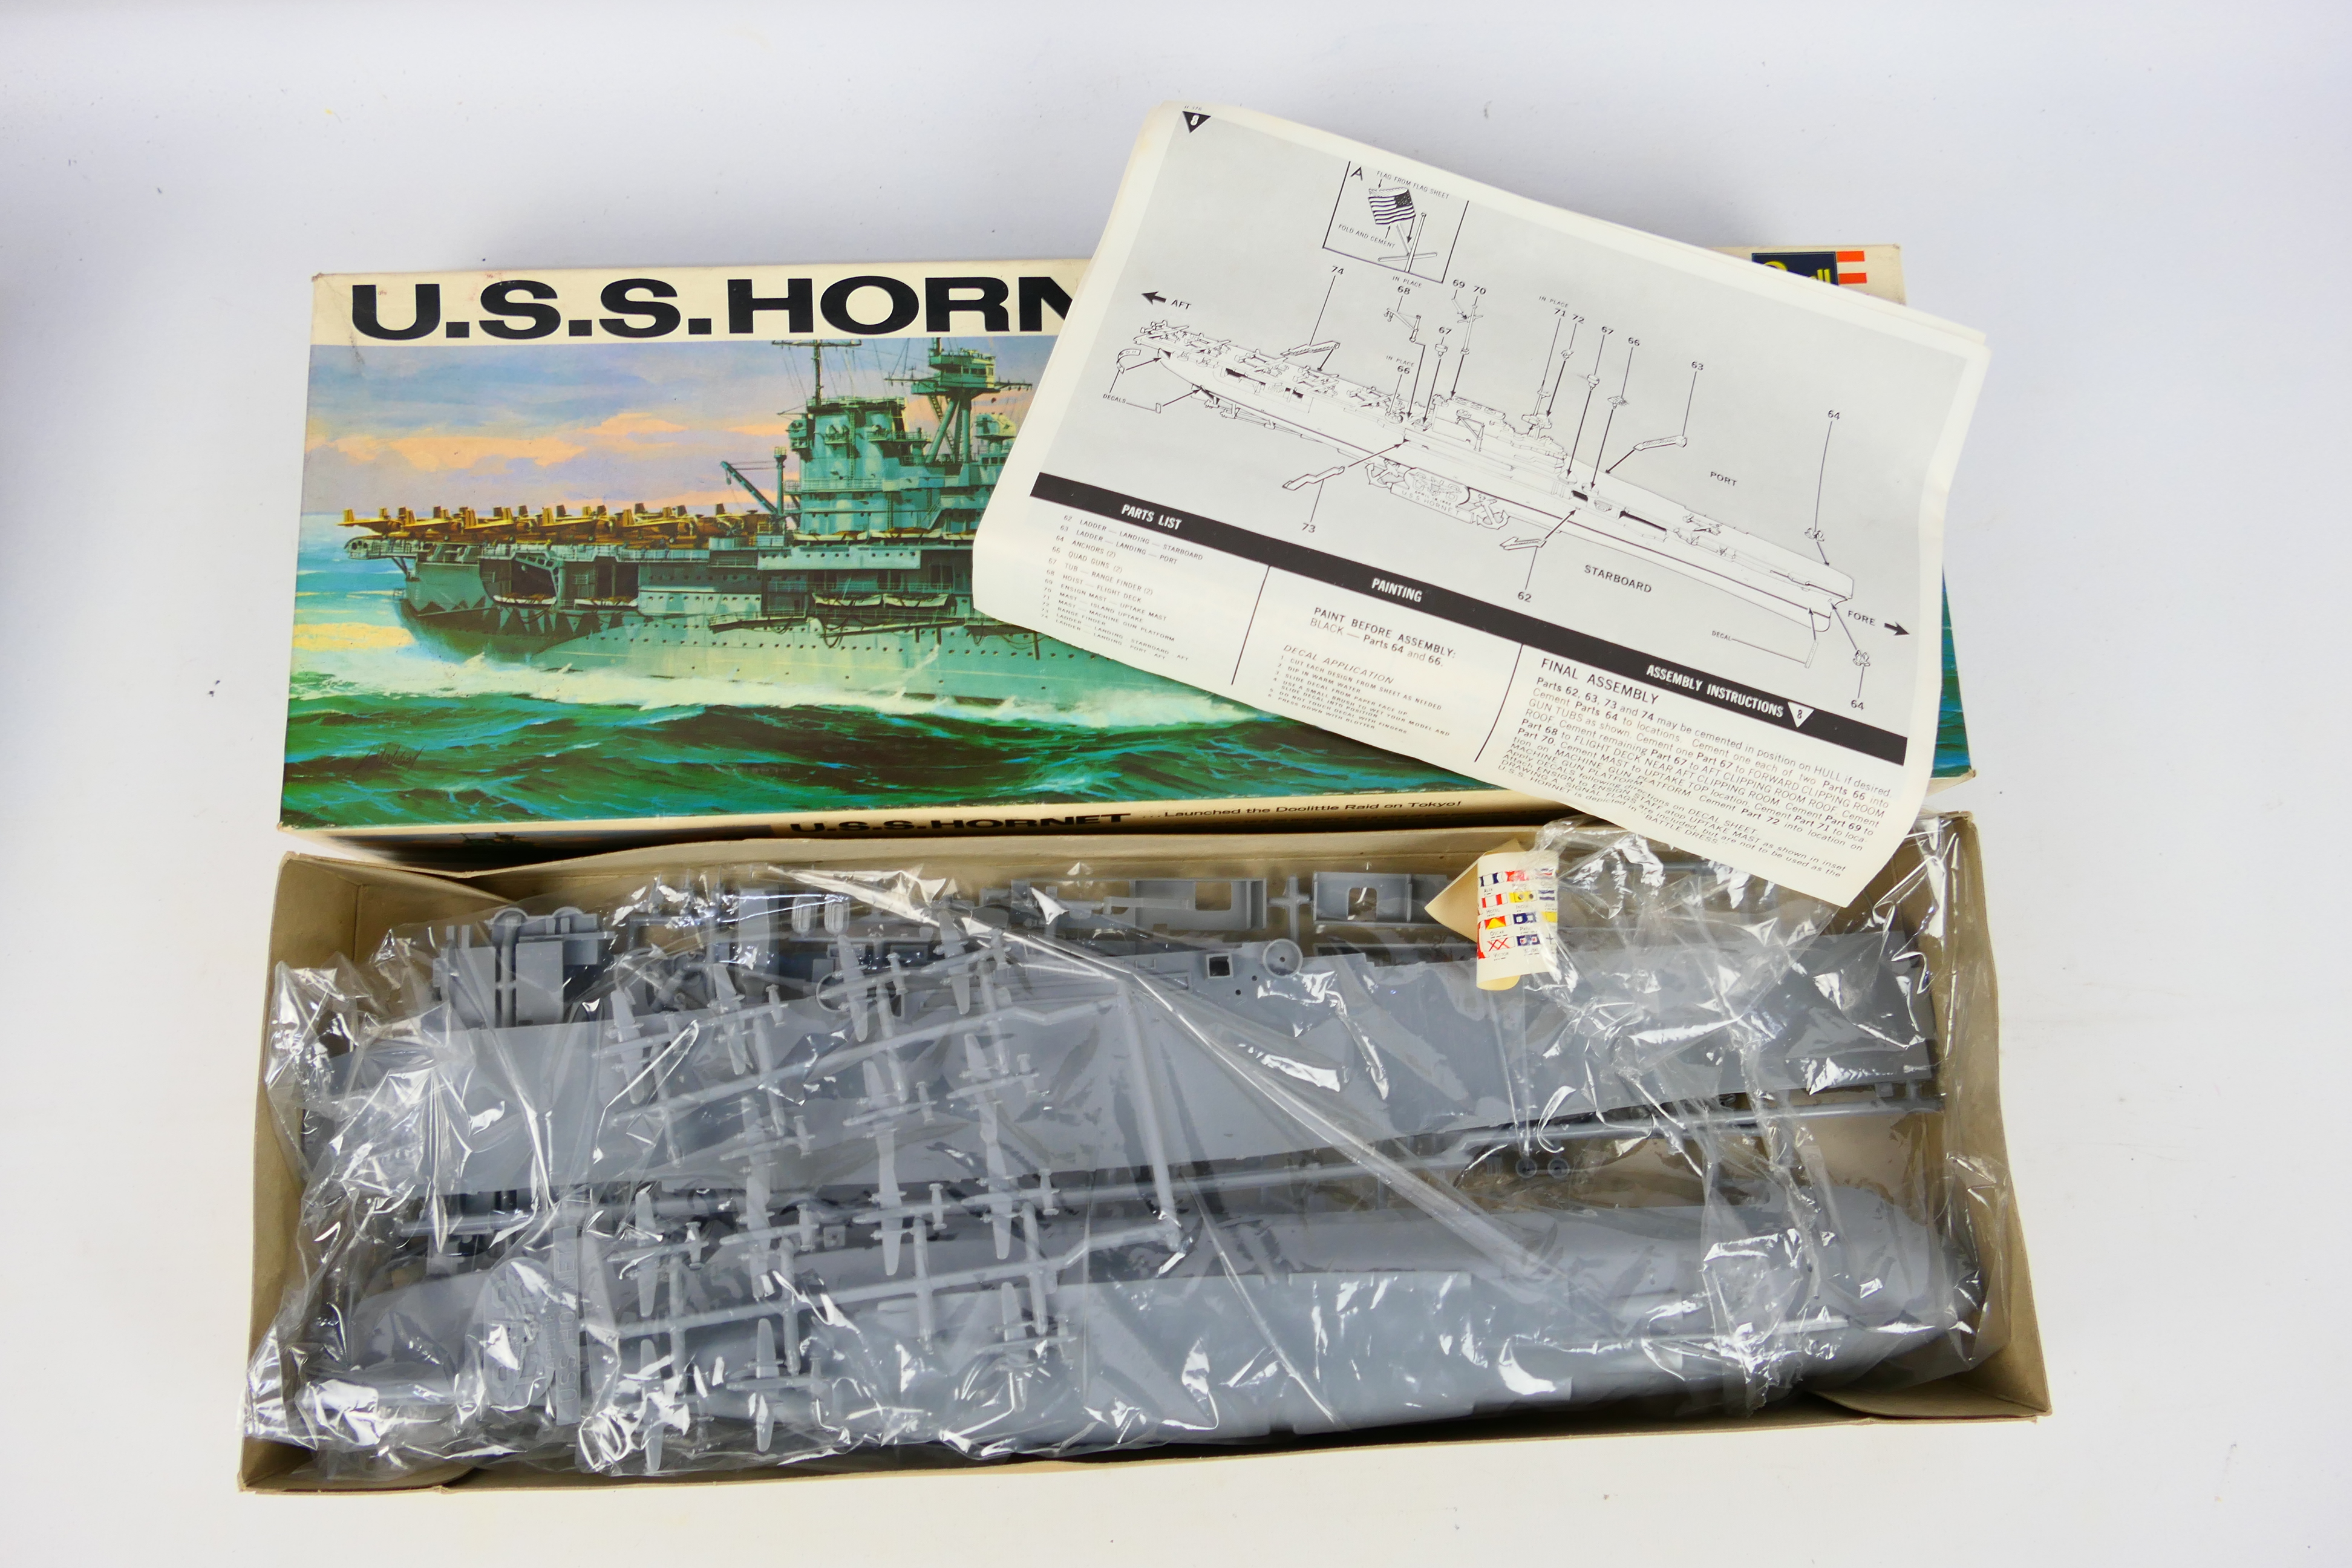 Airfix - Revell - A group of vintage model kits, HMS Tiger in 1:600 scale # 03201-0, - Image 7 of 14